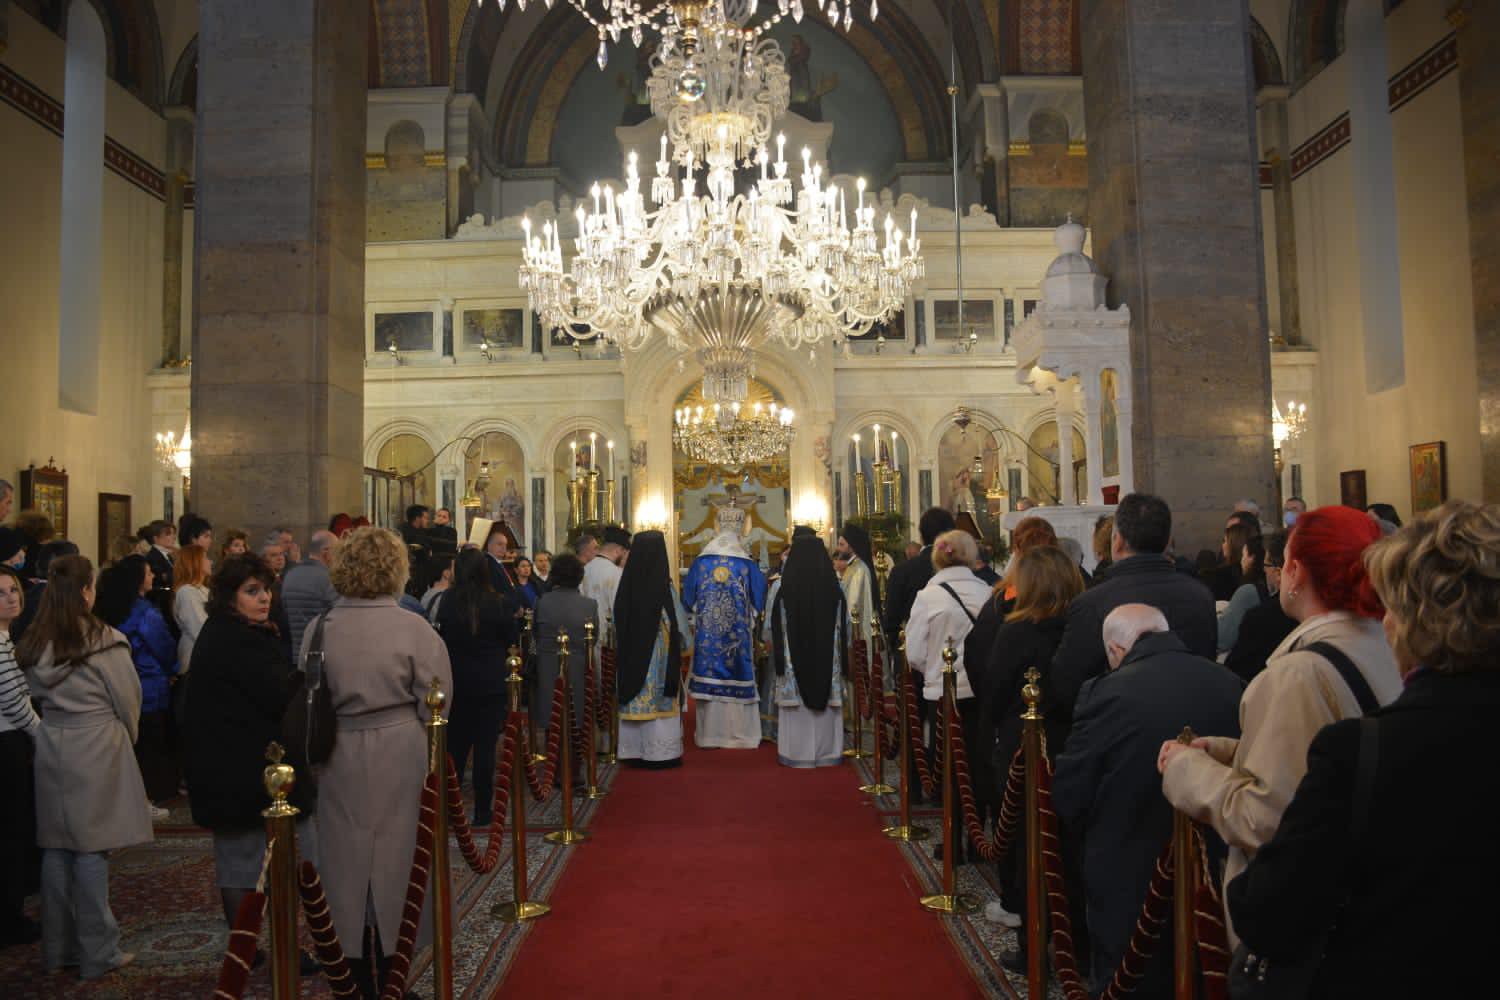 The Blessing of the Waters and throwing of the Cross took place in Chalcedon after 68 years